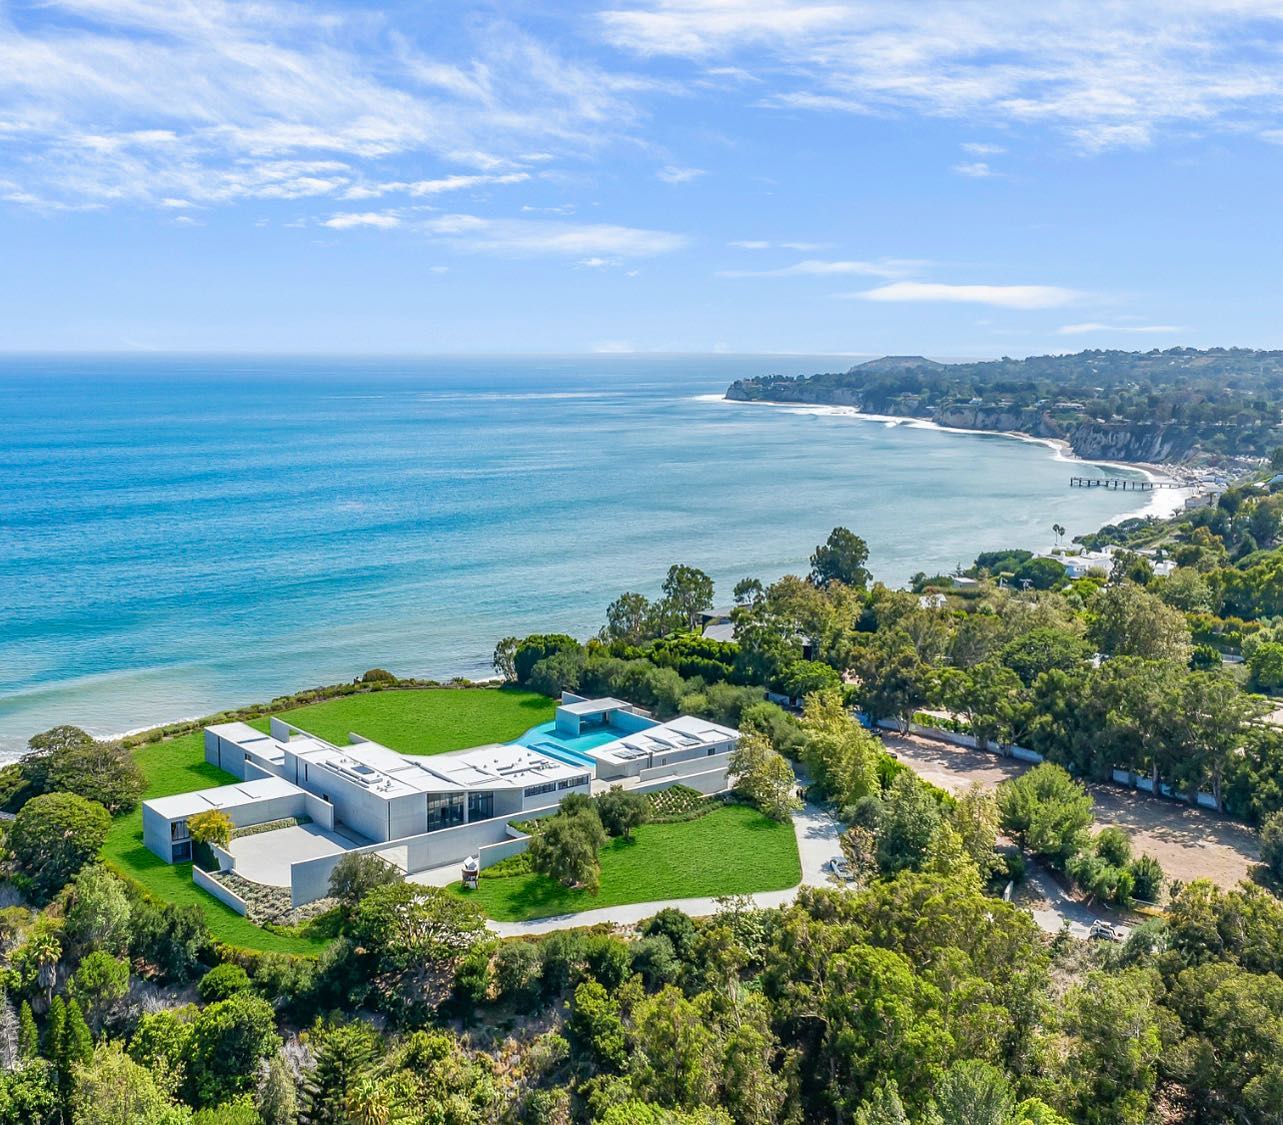 Jay-Z and Beyoncé Purchase Most Expensive Home Ever in California